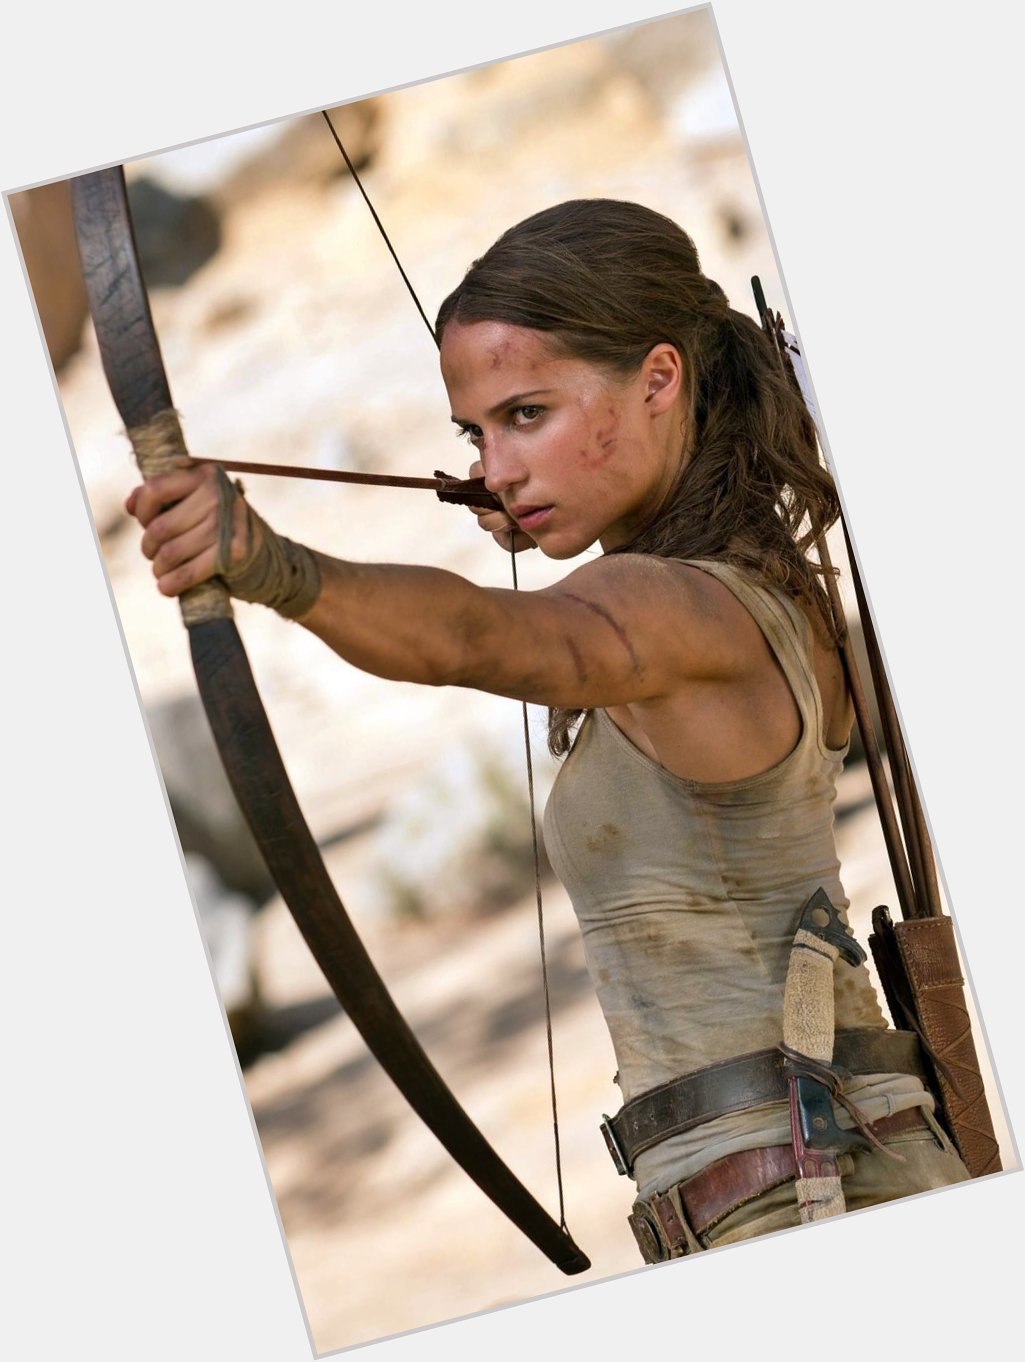 Happy Birthday to  Actress - Alicia Vikander Who is 34yo today!
(Excelling in 2018 below, playing Lara Croft) 